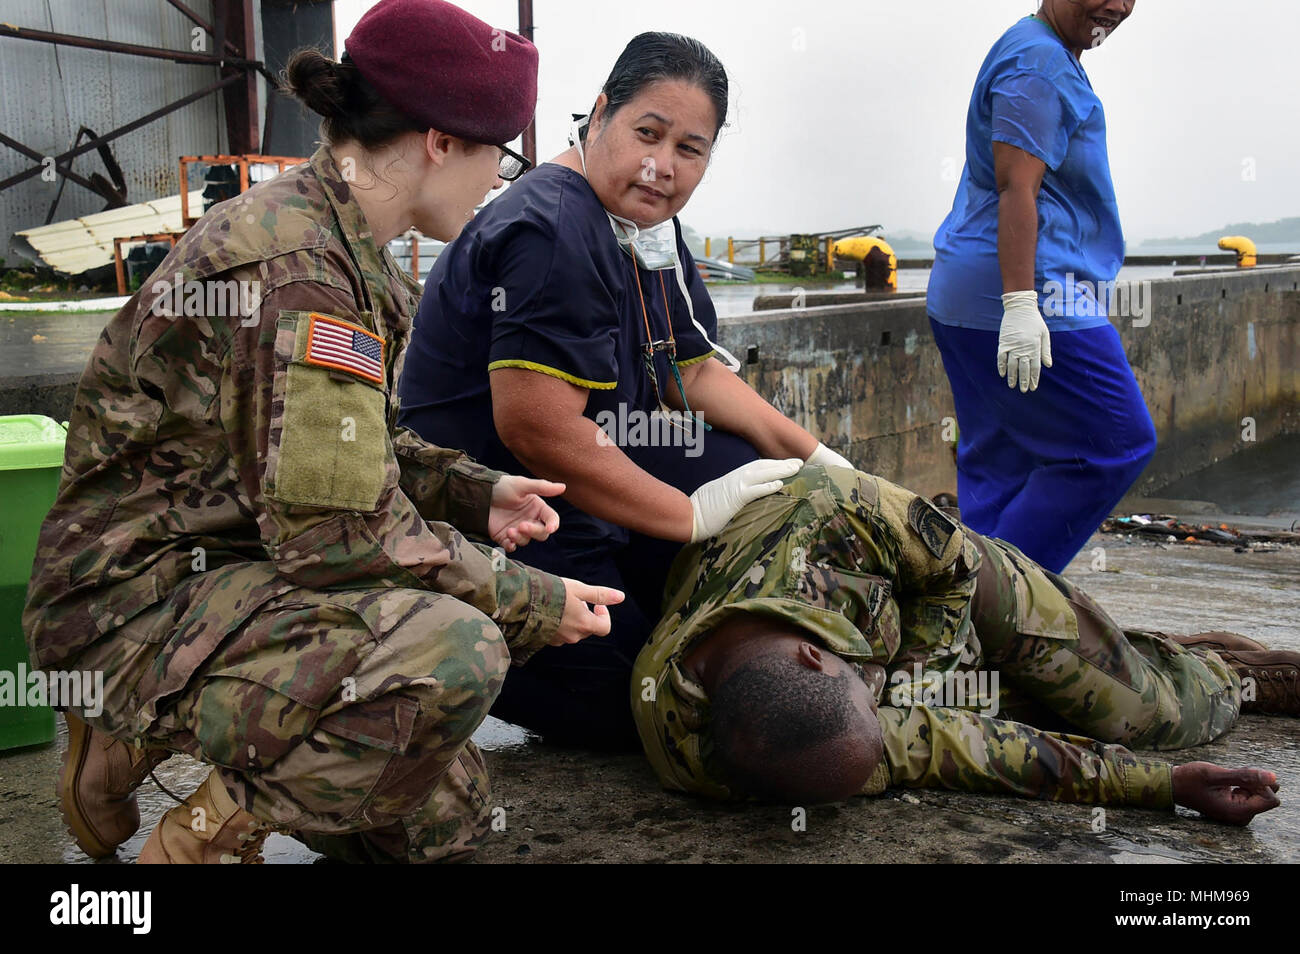 YAP, Federated States of Micronesia (March 28, 2018) U.S. Army Sgt. Alexa Falls (left) helps a local medical professional diagnose and treat U.S. Army Sgt. 1st Class Kevon Humphreys, a simulated medical casualty, while participating in a Humanitarian Assistance and Disaster Relief exercise during Pacific Partnership 2018 Yap (PP18) March 28. PP18's mission is to work collectively with host and partner nations to enhance regional interoperability and disaster response capabilities, increase stability and security in the region, and foster new and enduring friendships across the Indo-Pacific Reg Stock Photo